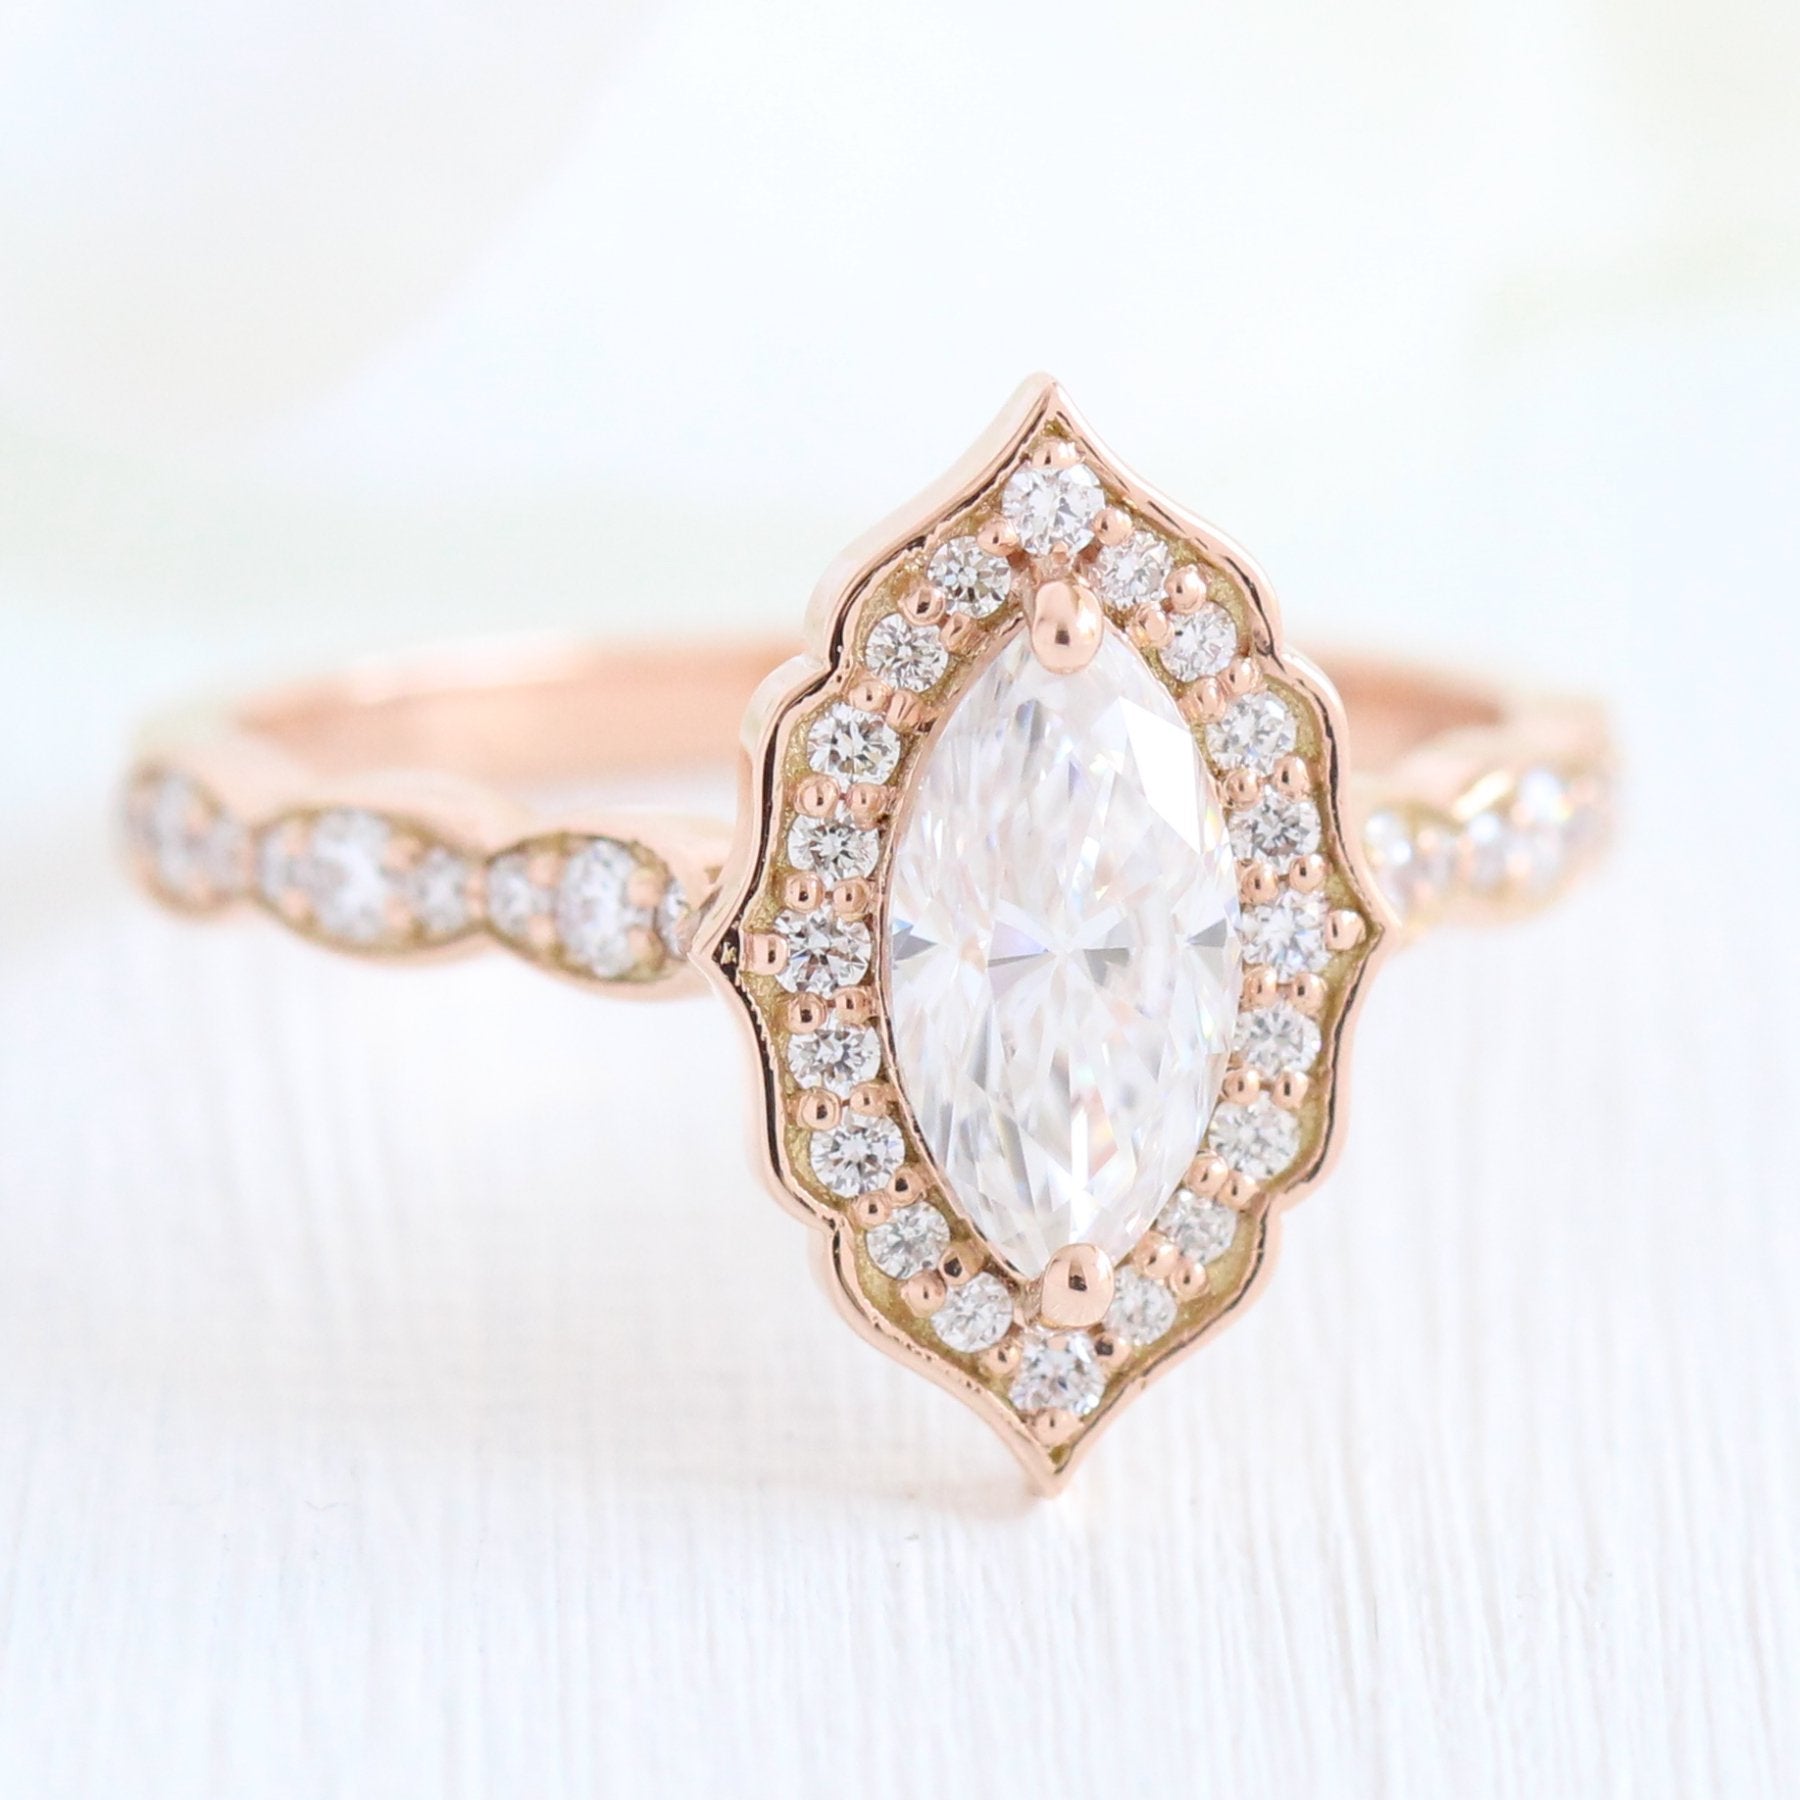 Admirable Marquise Shape Engagement Ring